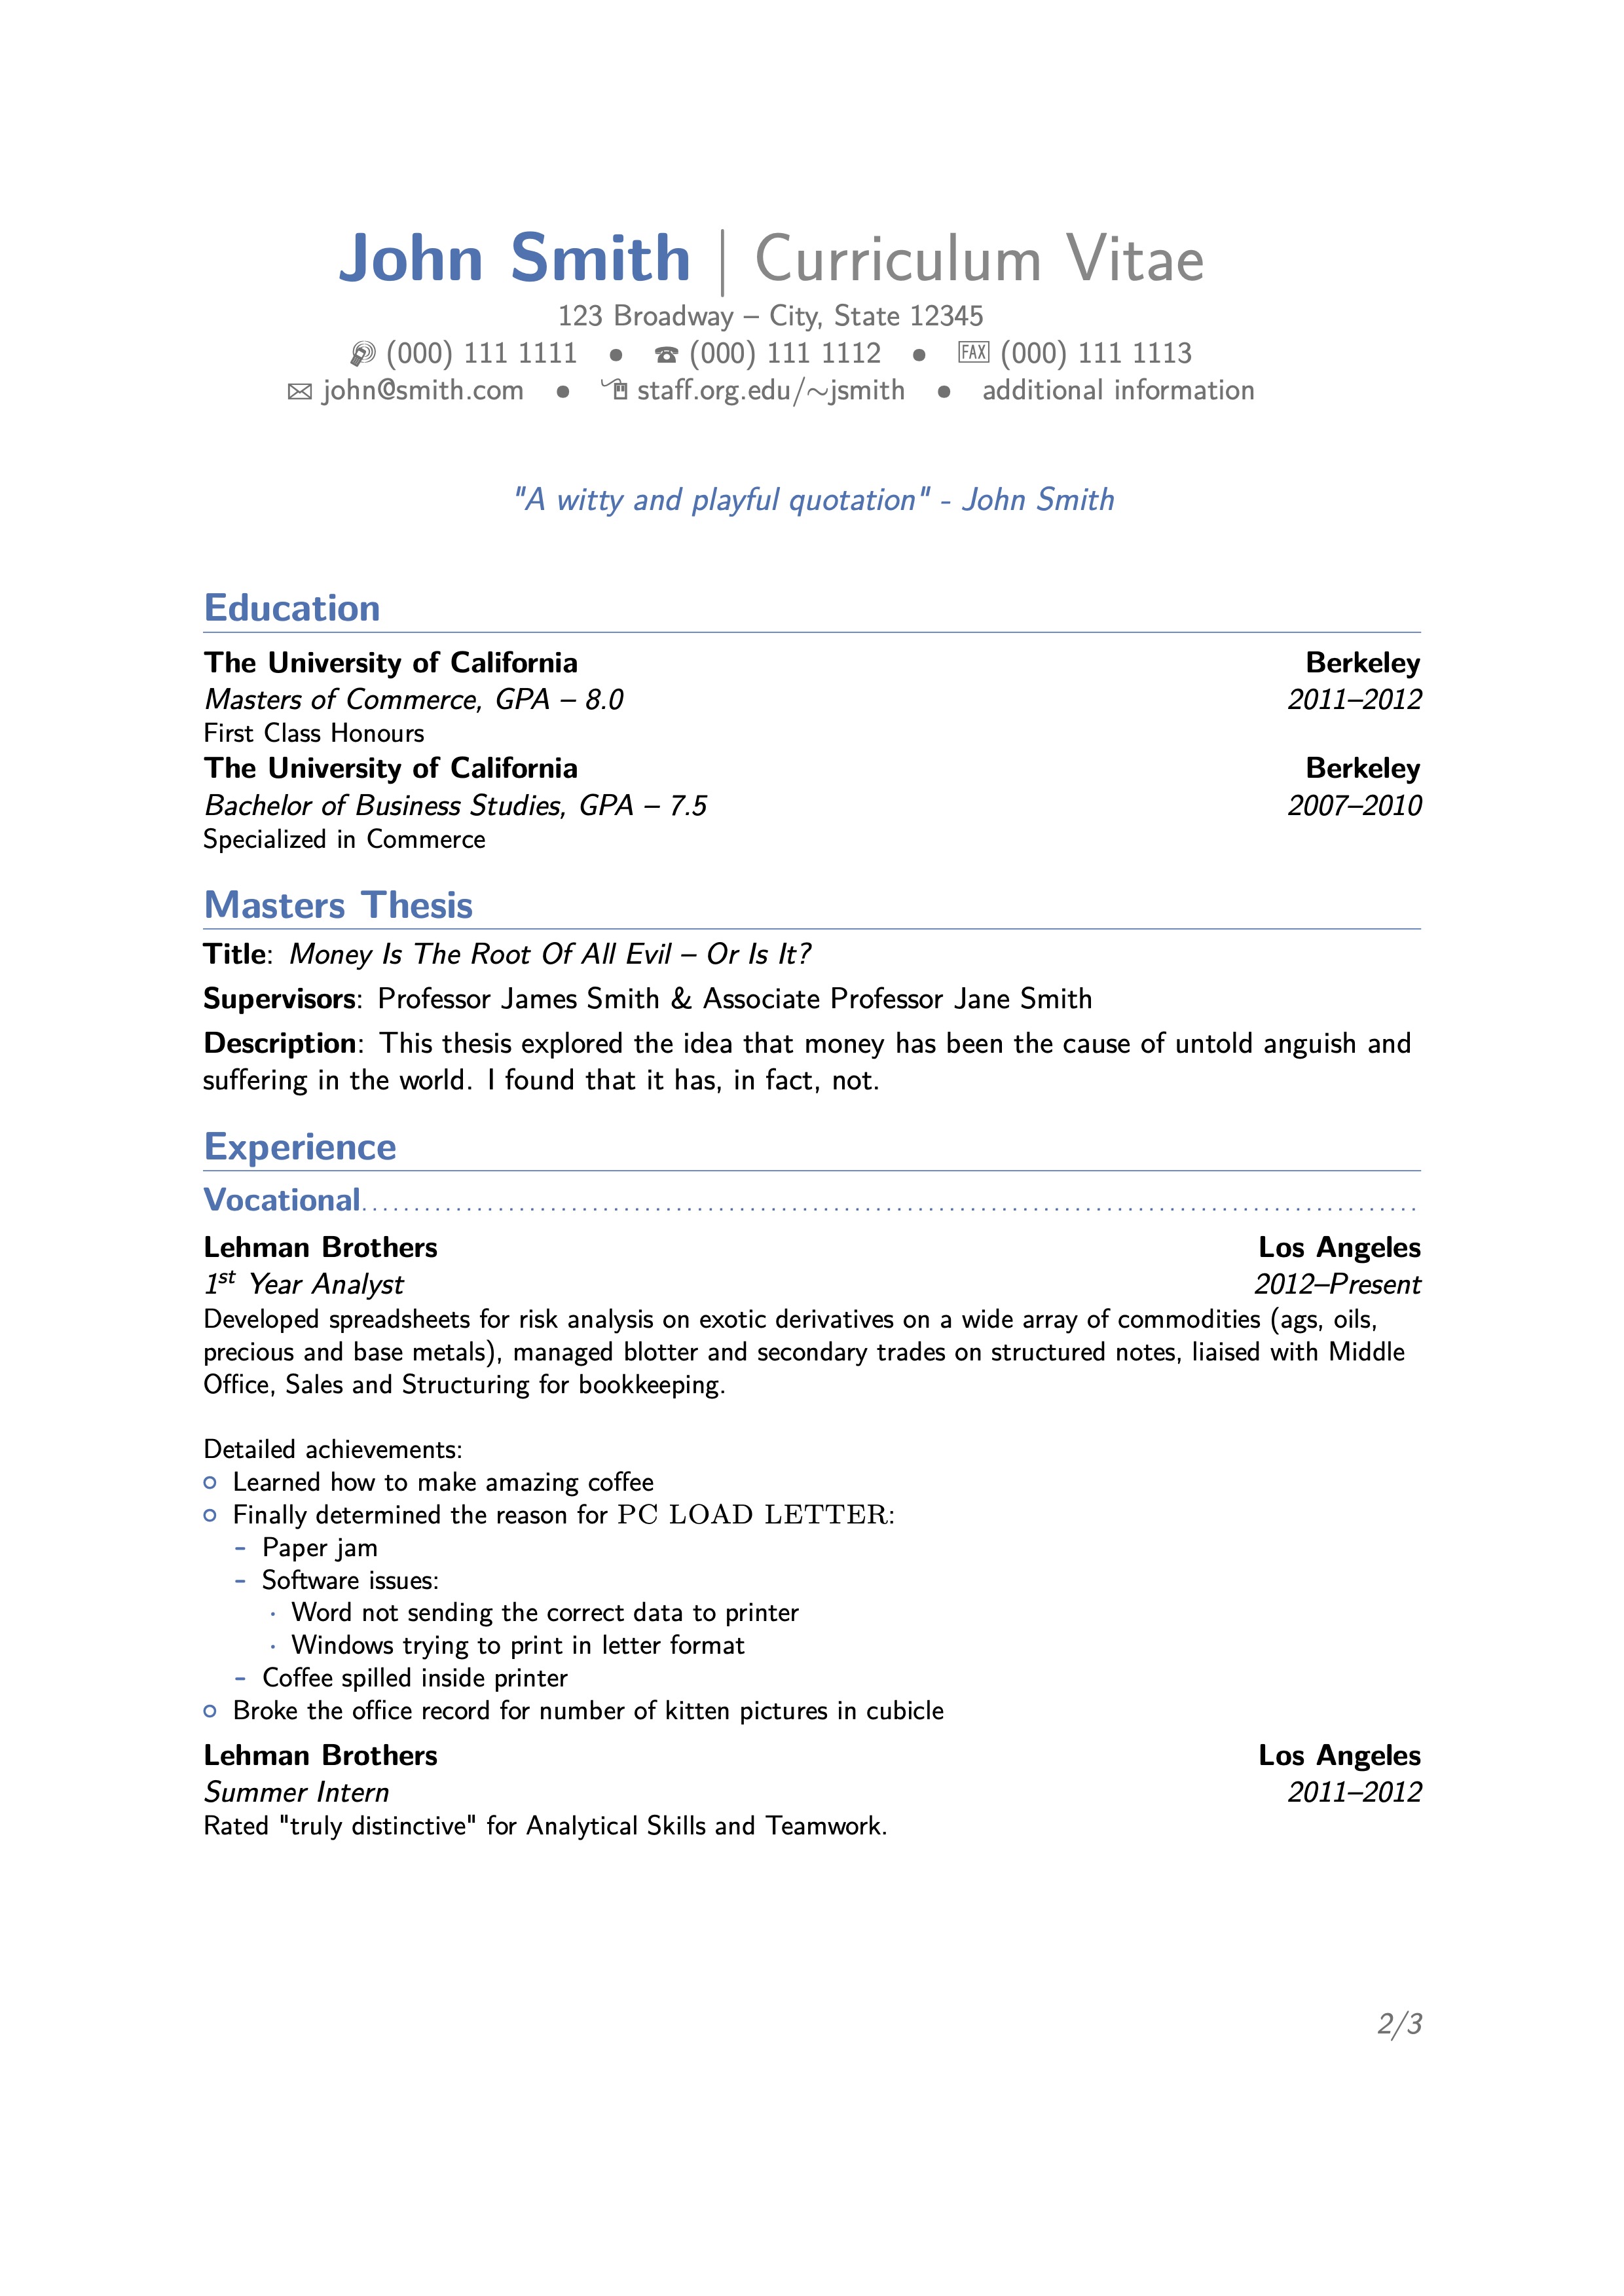 LaTeX Templates - ModernCV CV and Cover Letter